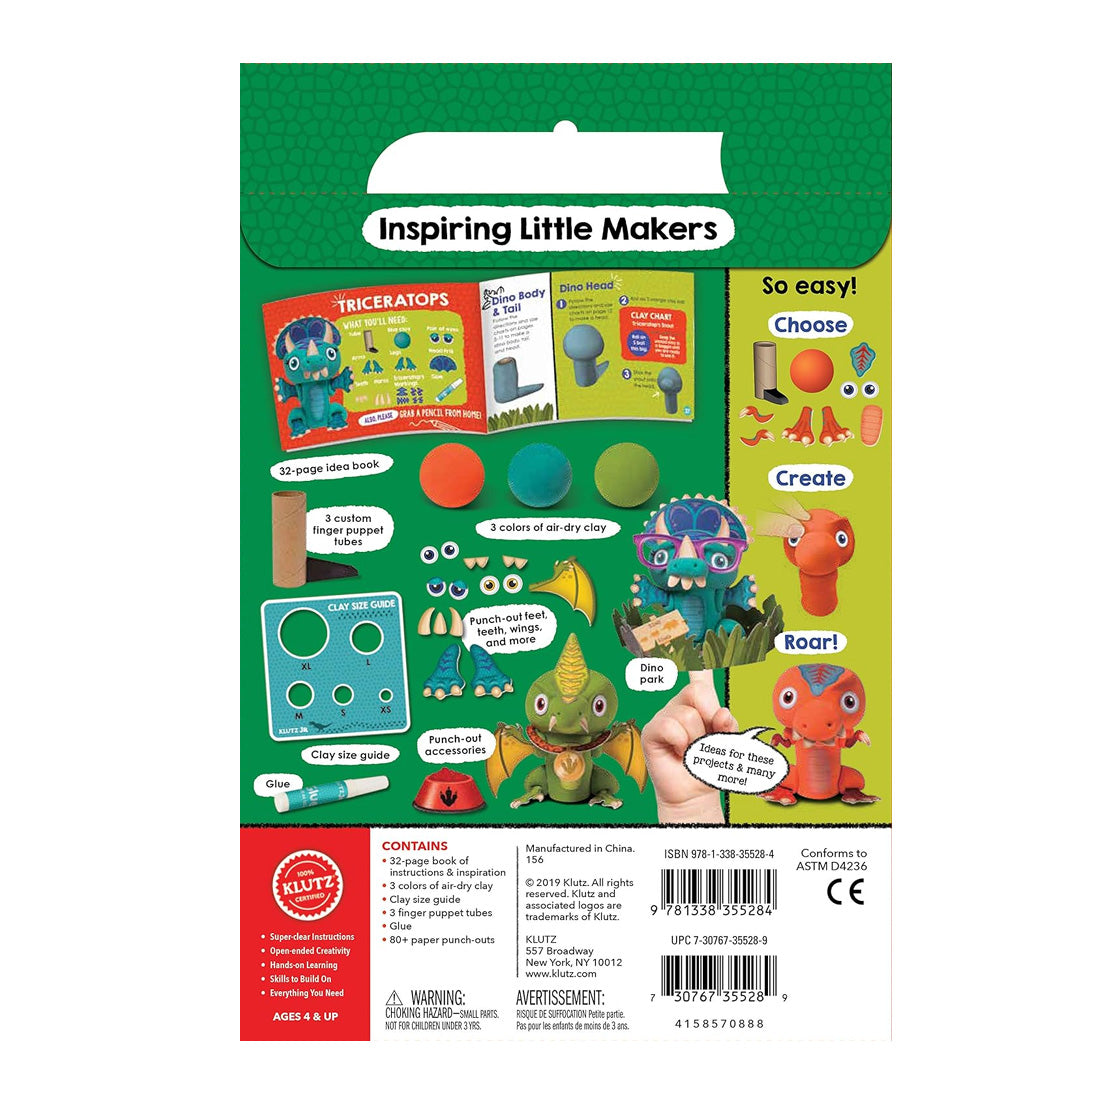 Klutz: Book & Activity Kit: My Dino Finger Puppets